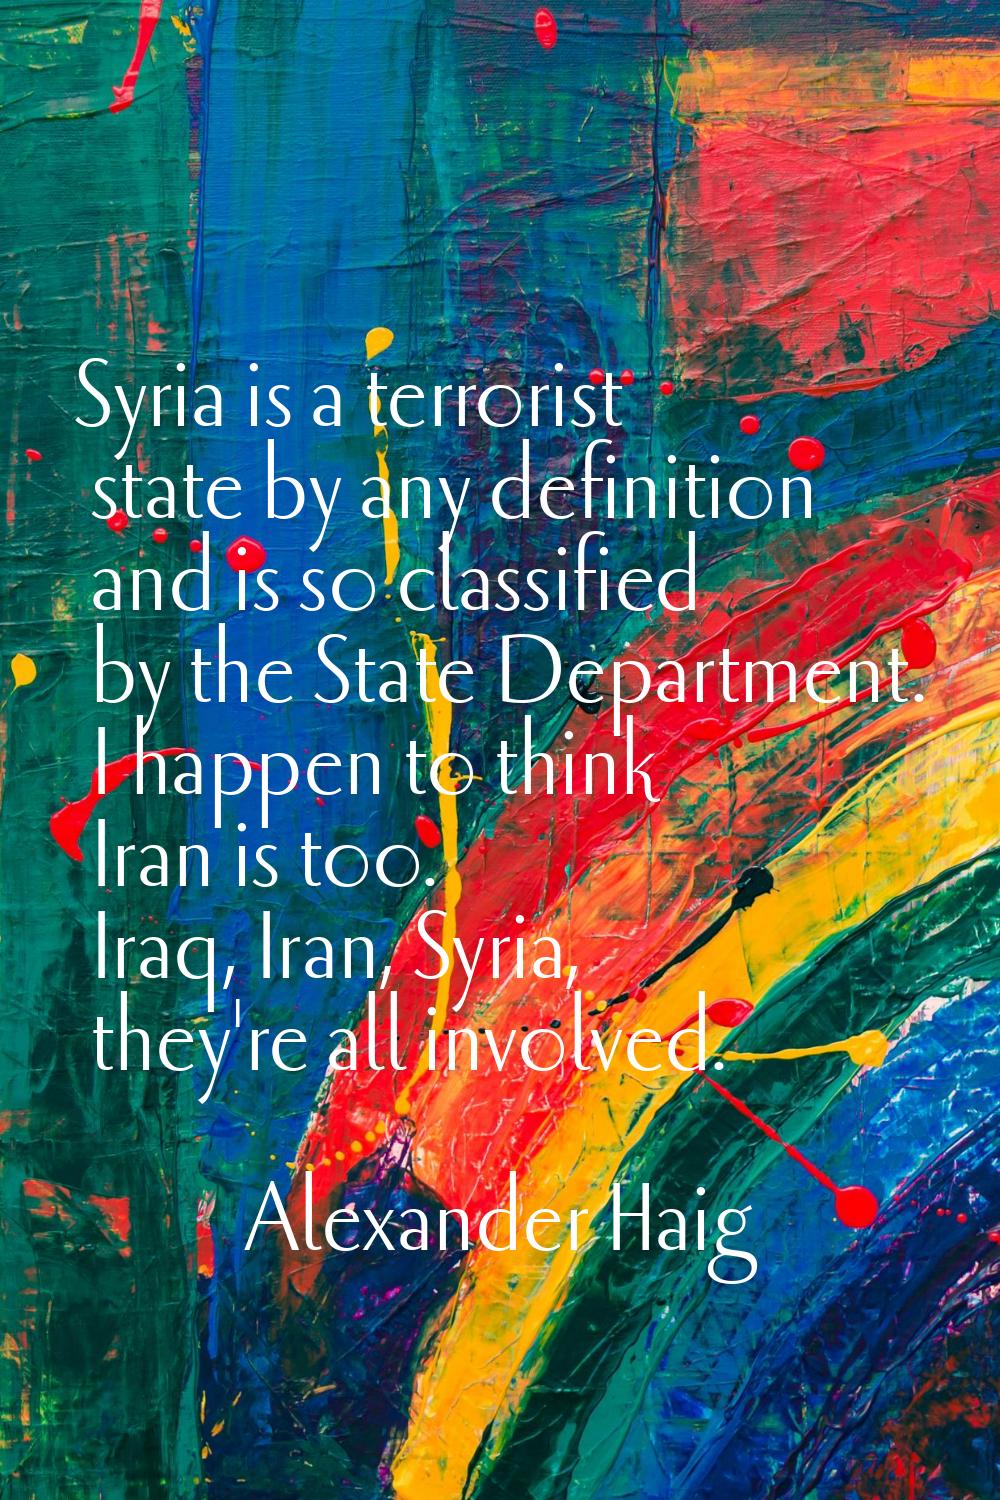 Syria is a terrorist state by any definition and is so classified by the State Department. I happen